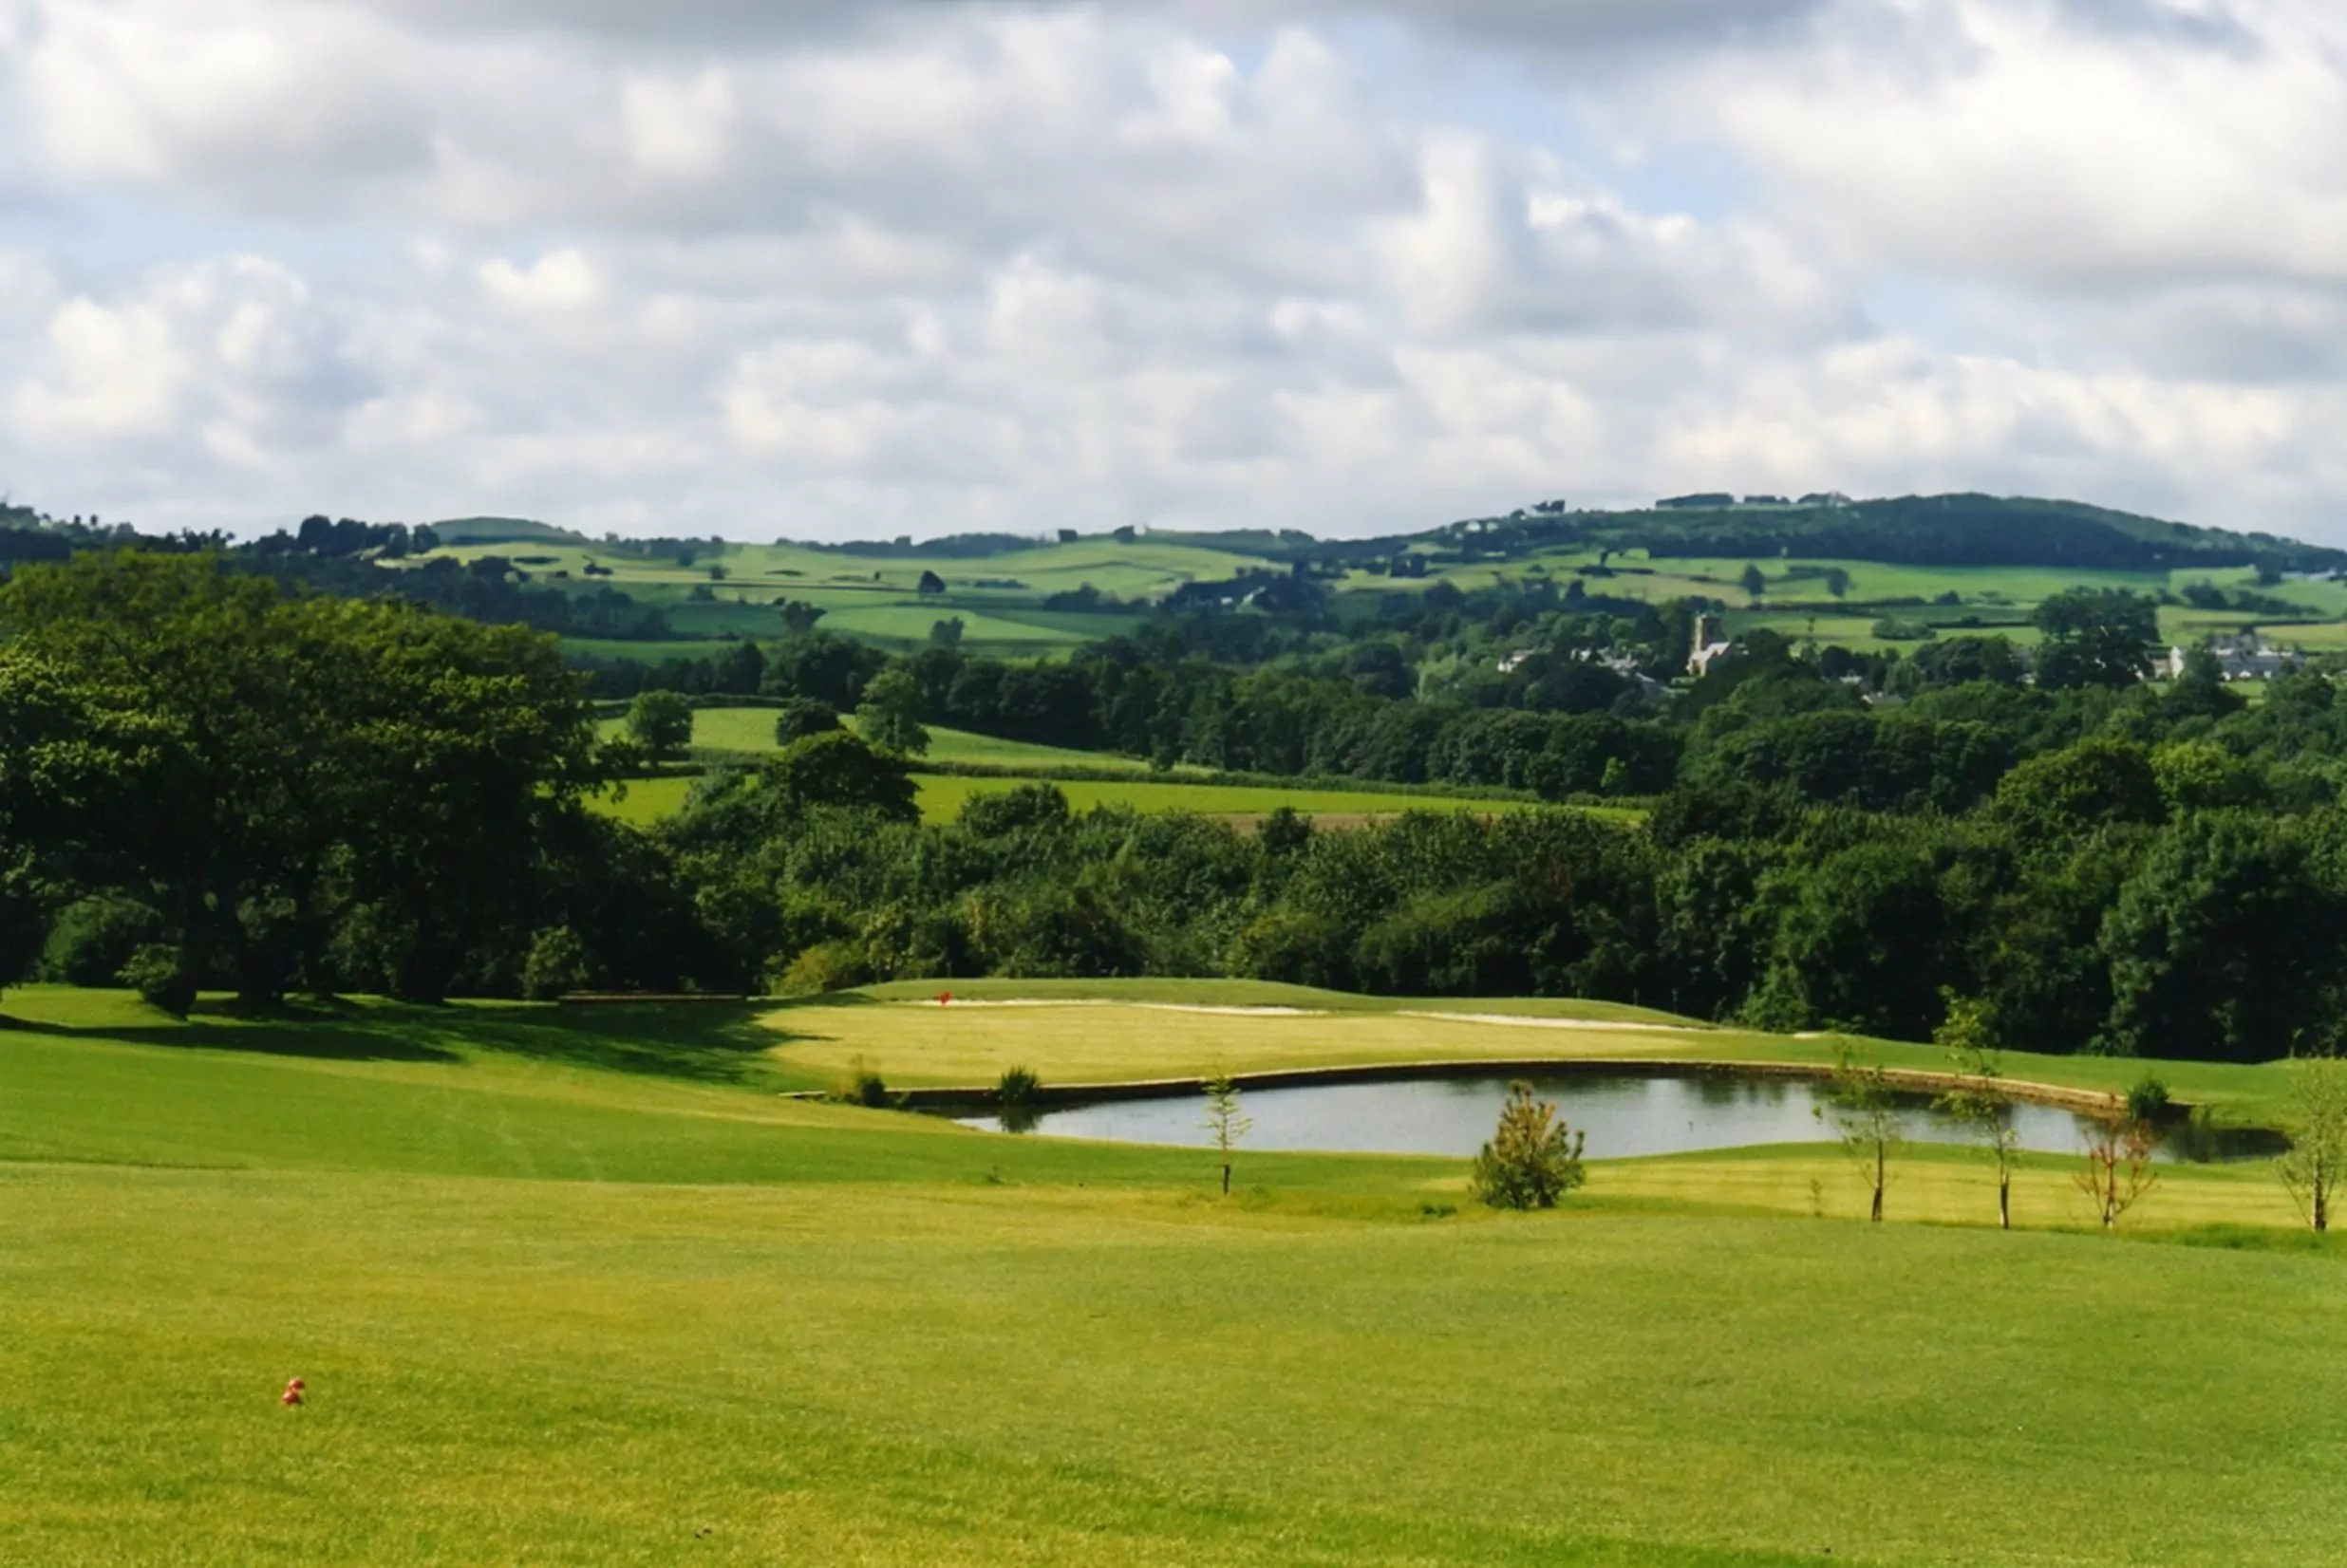 View from the golf course at Pennant Park, North Wales